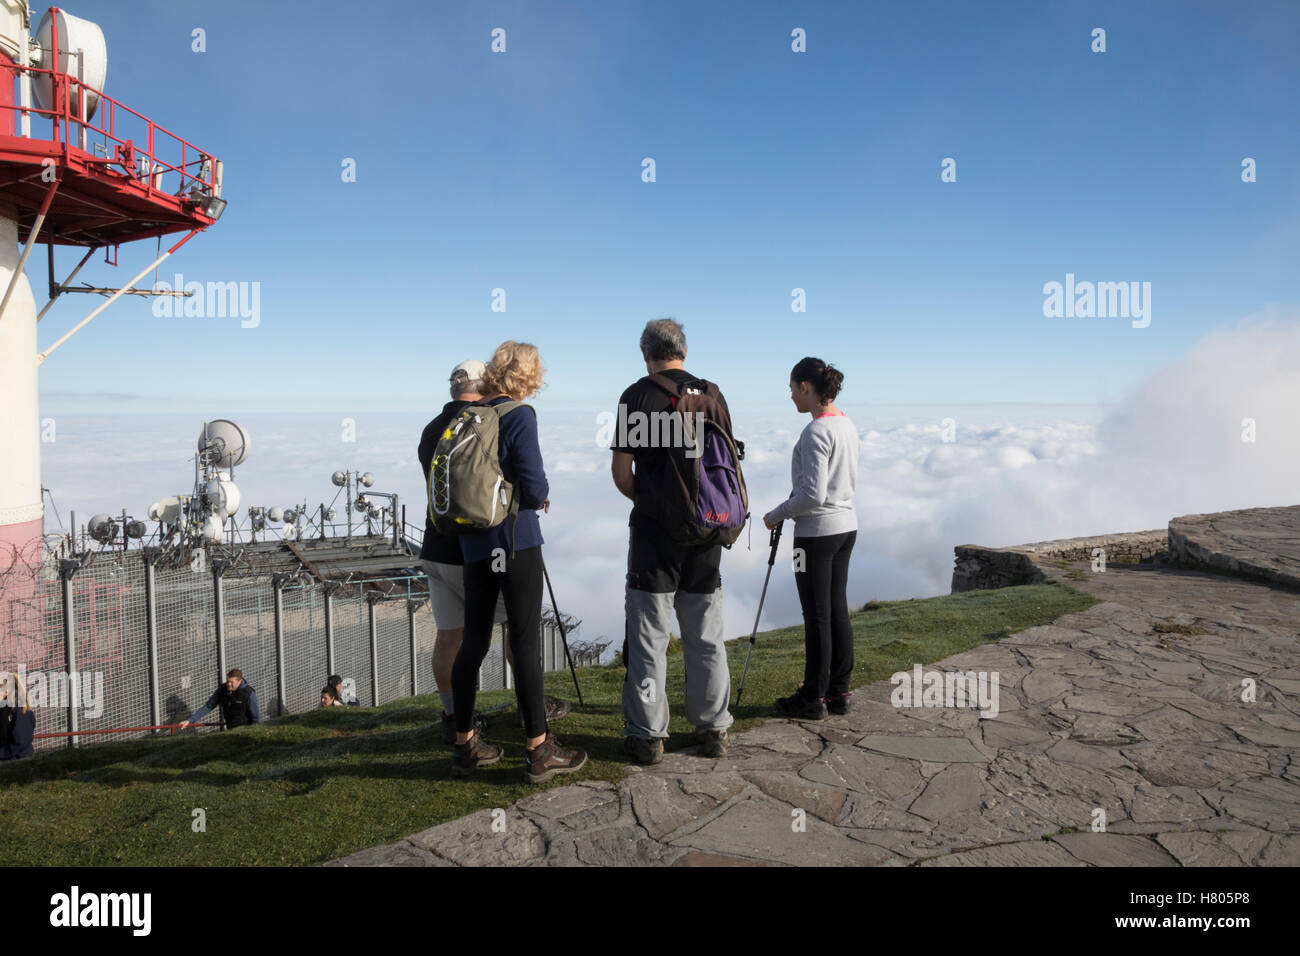 La Rhune, walkers at the summit, above cloud Stock Photo